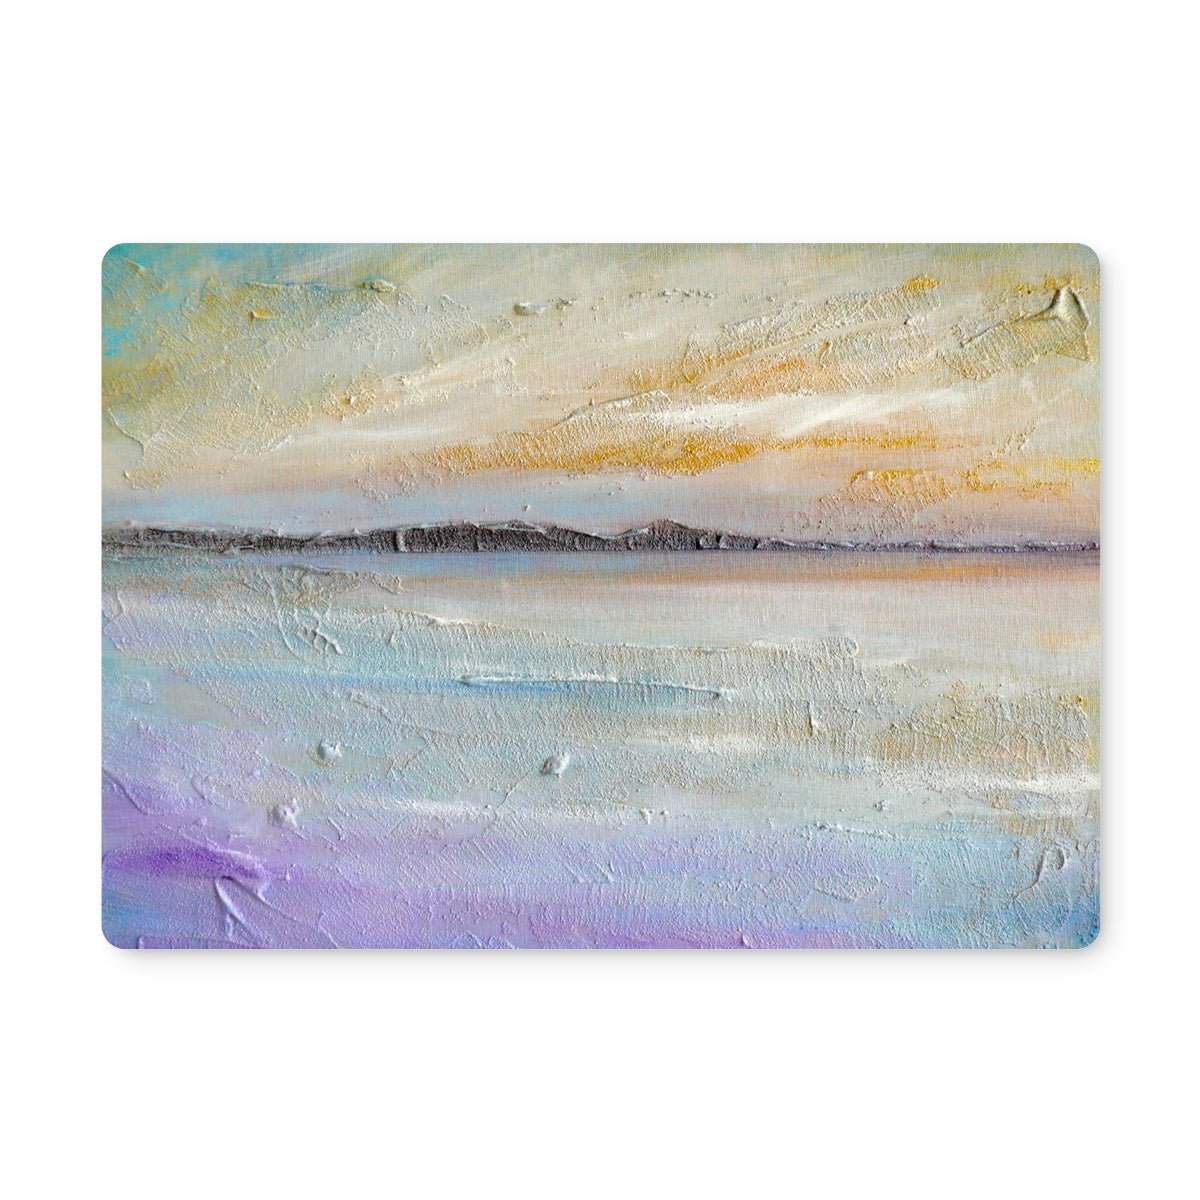 Sollas Beach South Uist Art Gifts Placemat-Placemats-Hebridean Islands Art Gallery-Single Placemat-Paintings, Prints, Homeware, Art Gifts From Scotland By Scottish Artist Kevin Hunter